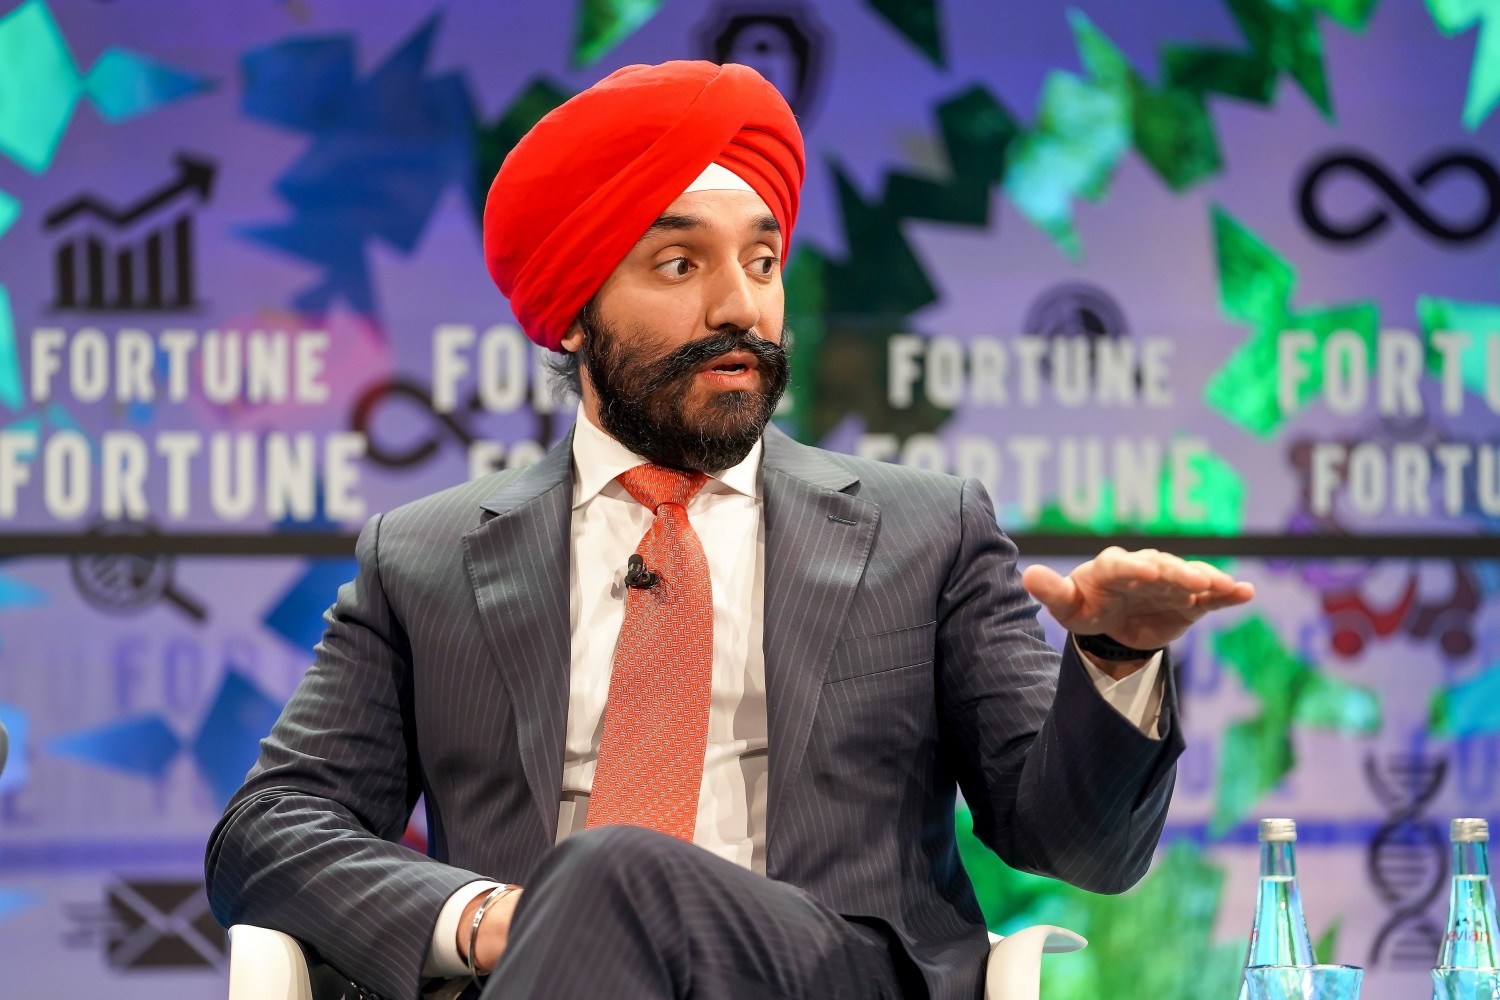 Navdeep Bains more minister than MP, leaving Malton without a voice